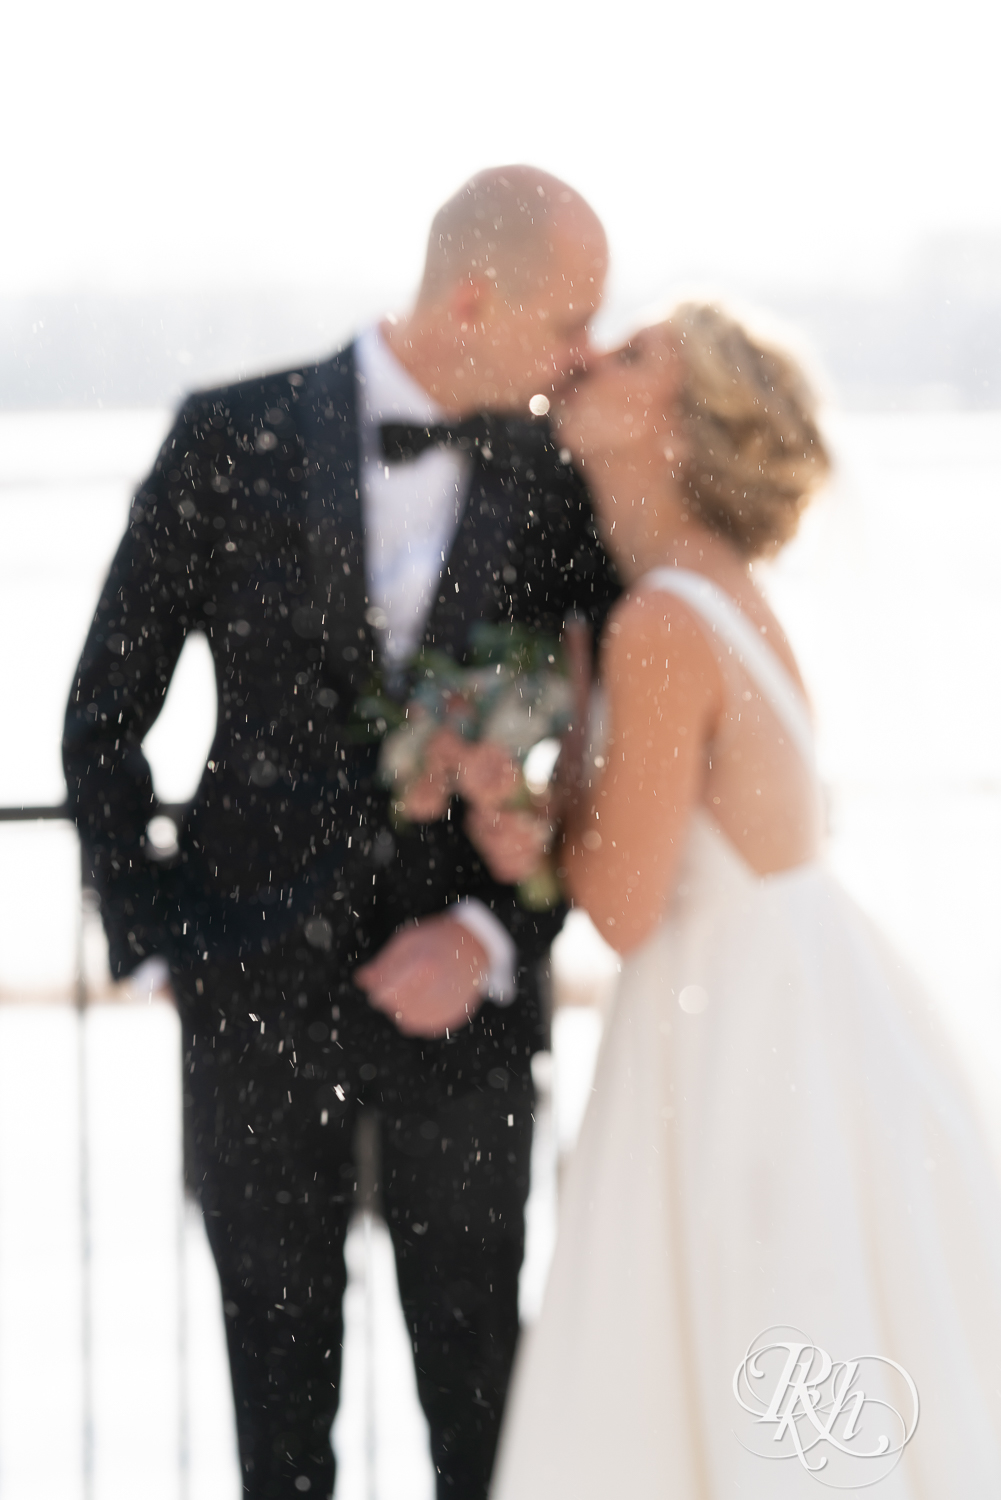 Bride and groom kissing in falling snow at Braemar Golf Course in Edina, Minnesota.